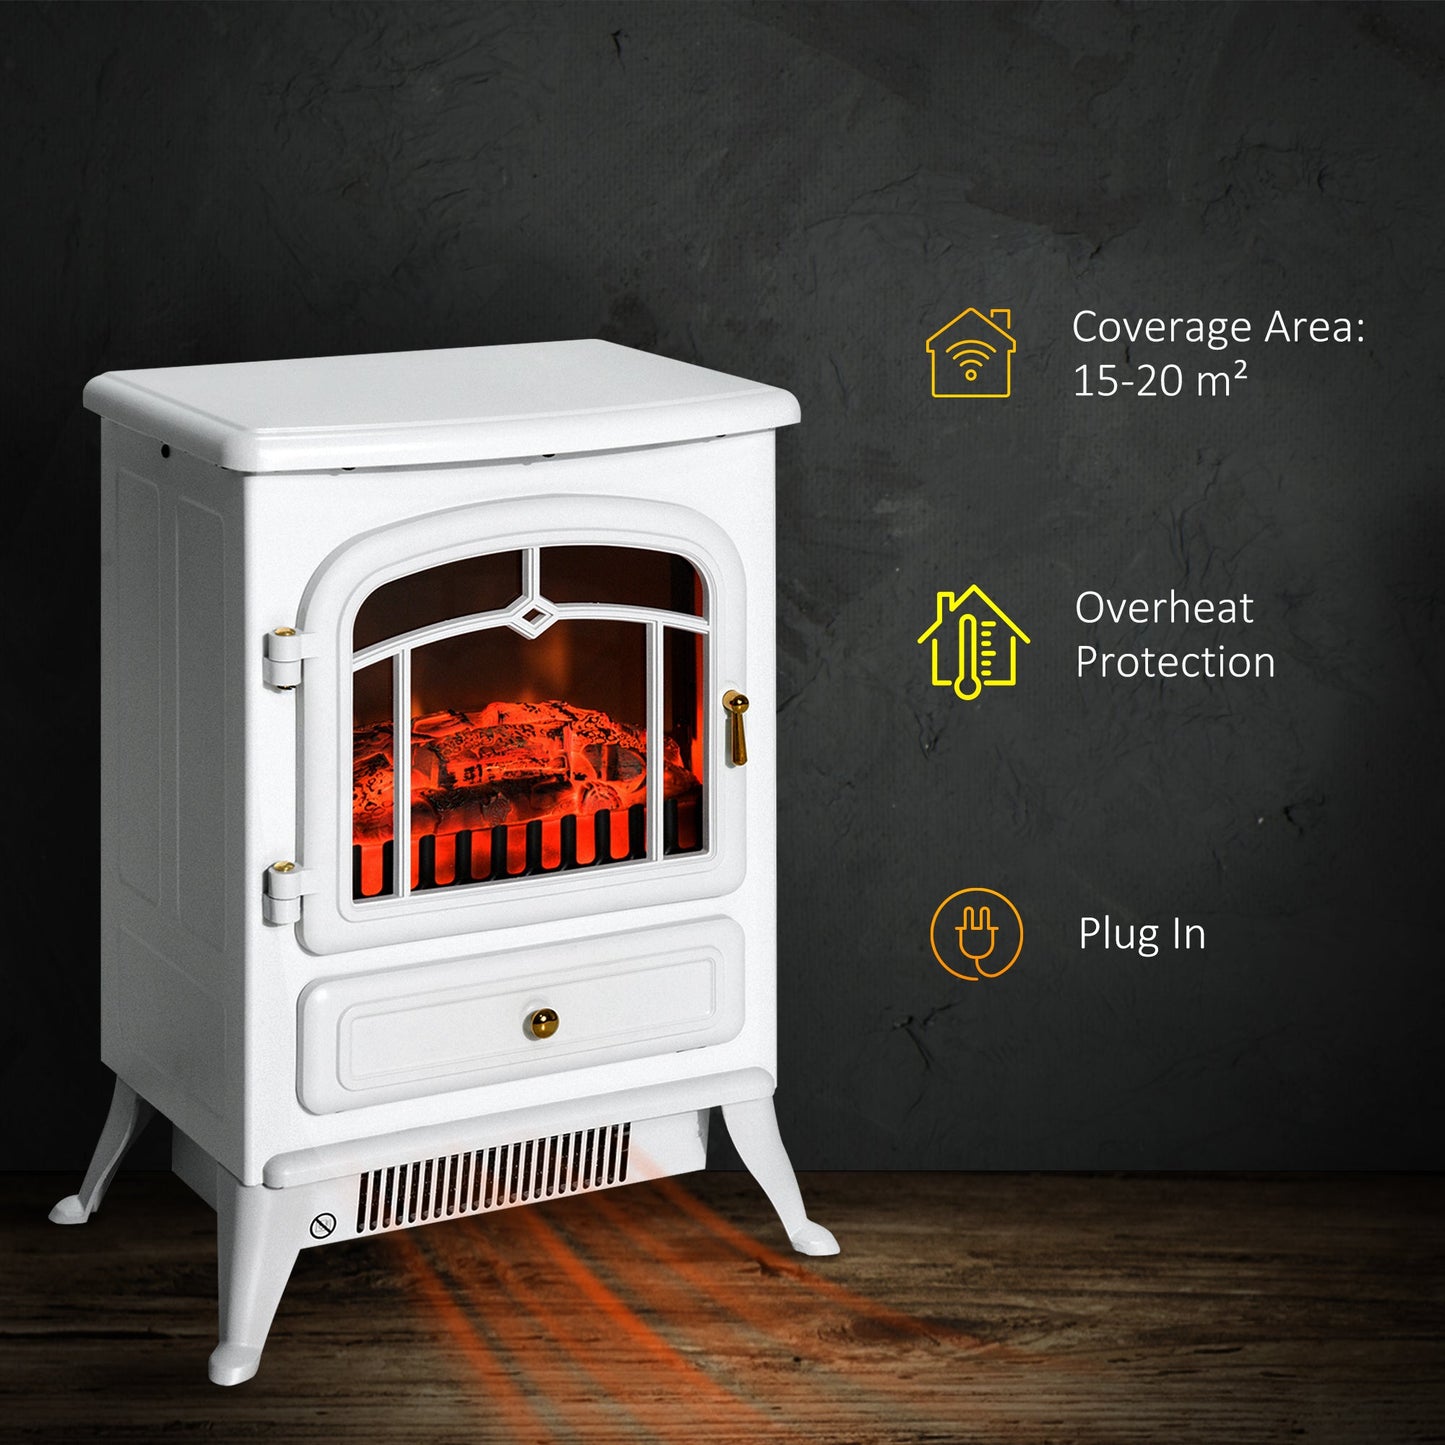 Miscellaneous-Electric Fireplace Heater, White Fireplace Stove with Realistic LED Log Flames and Overheating Safety Protection, 750/1500W - Outdoor Style Company